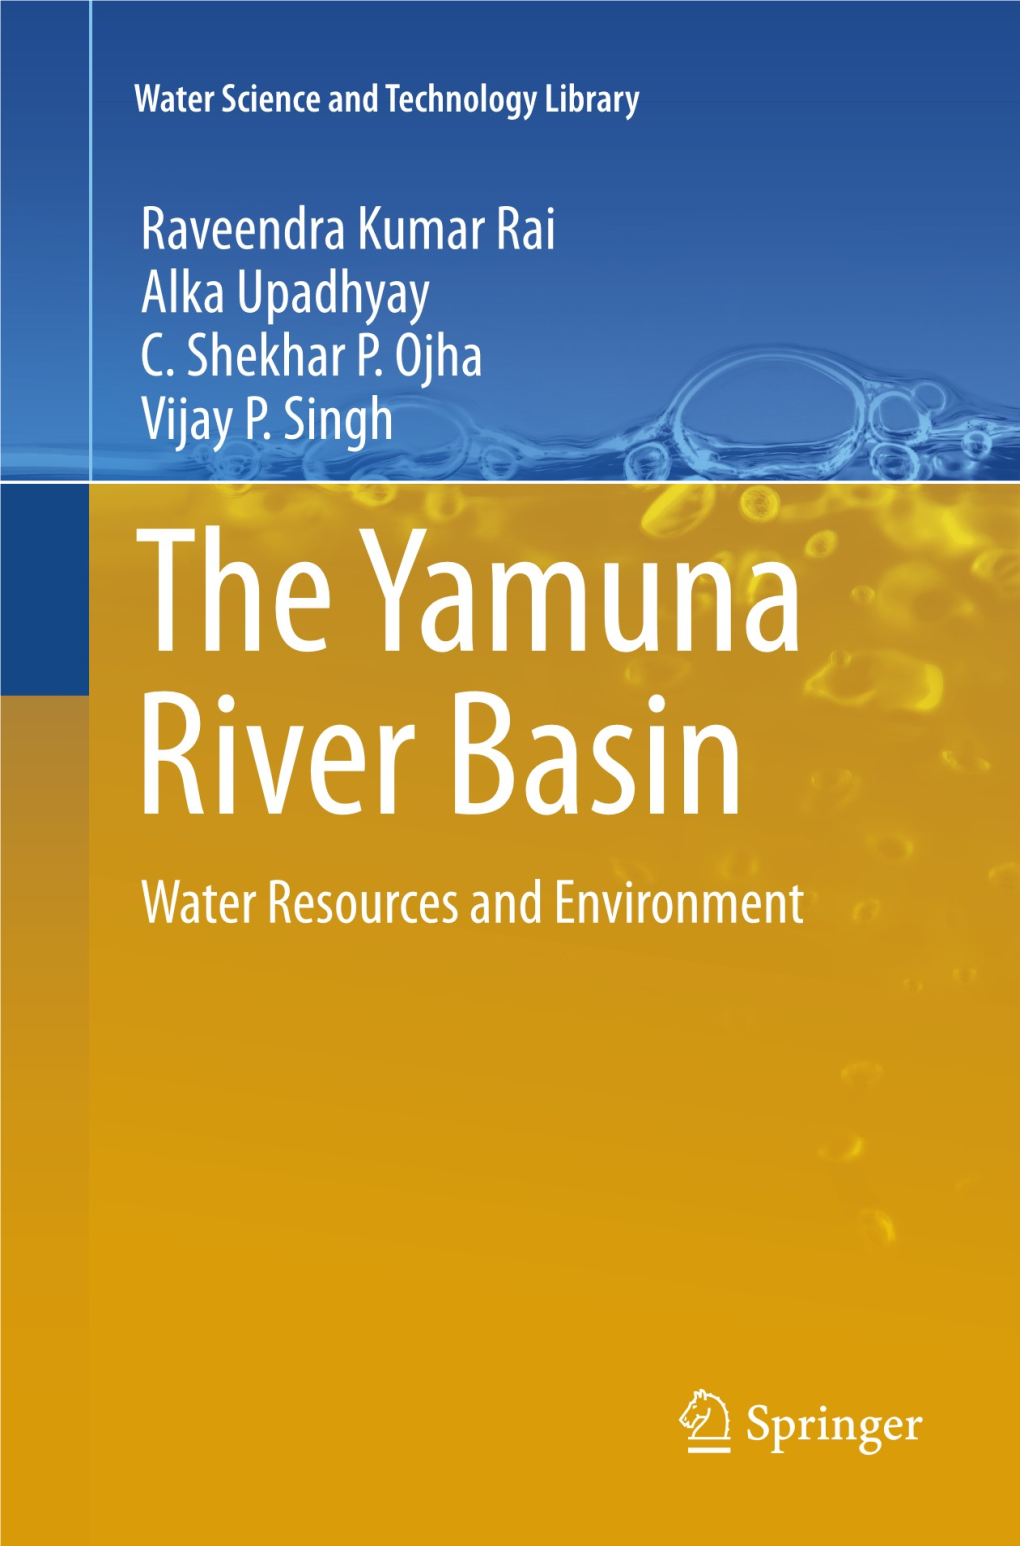 The Yamuna River Basin Water Science and Technology Library